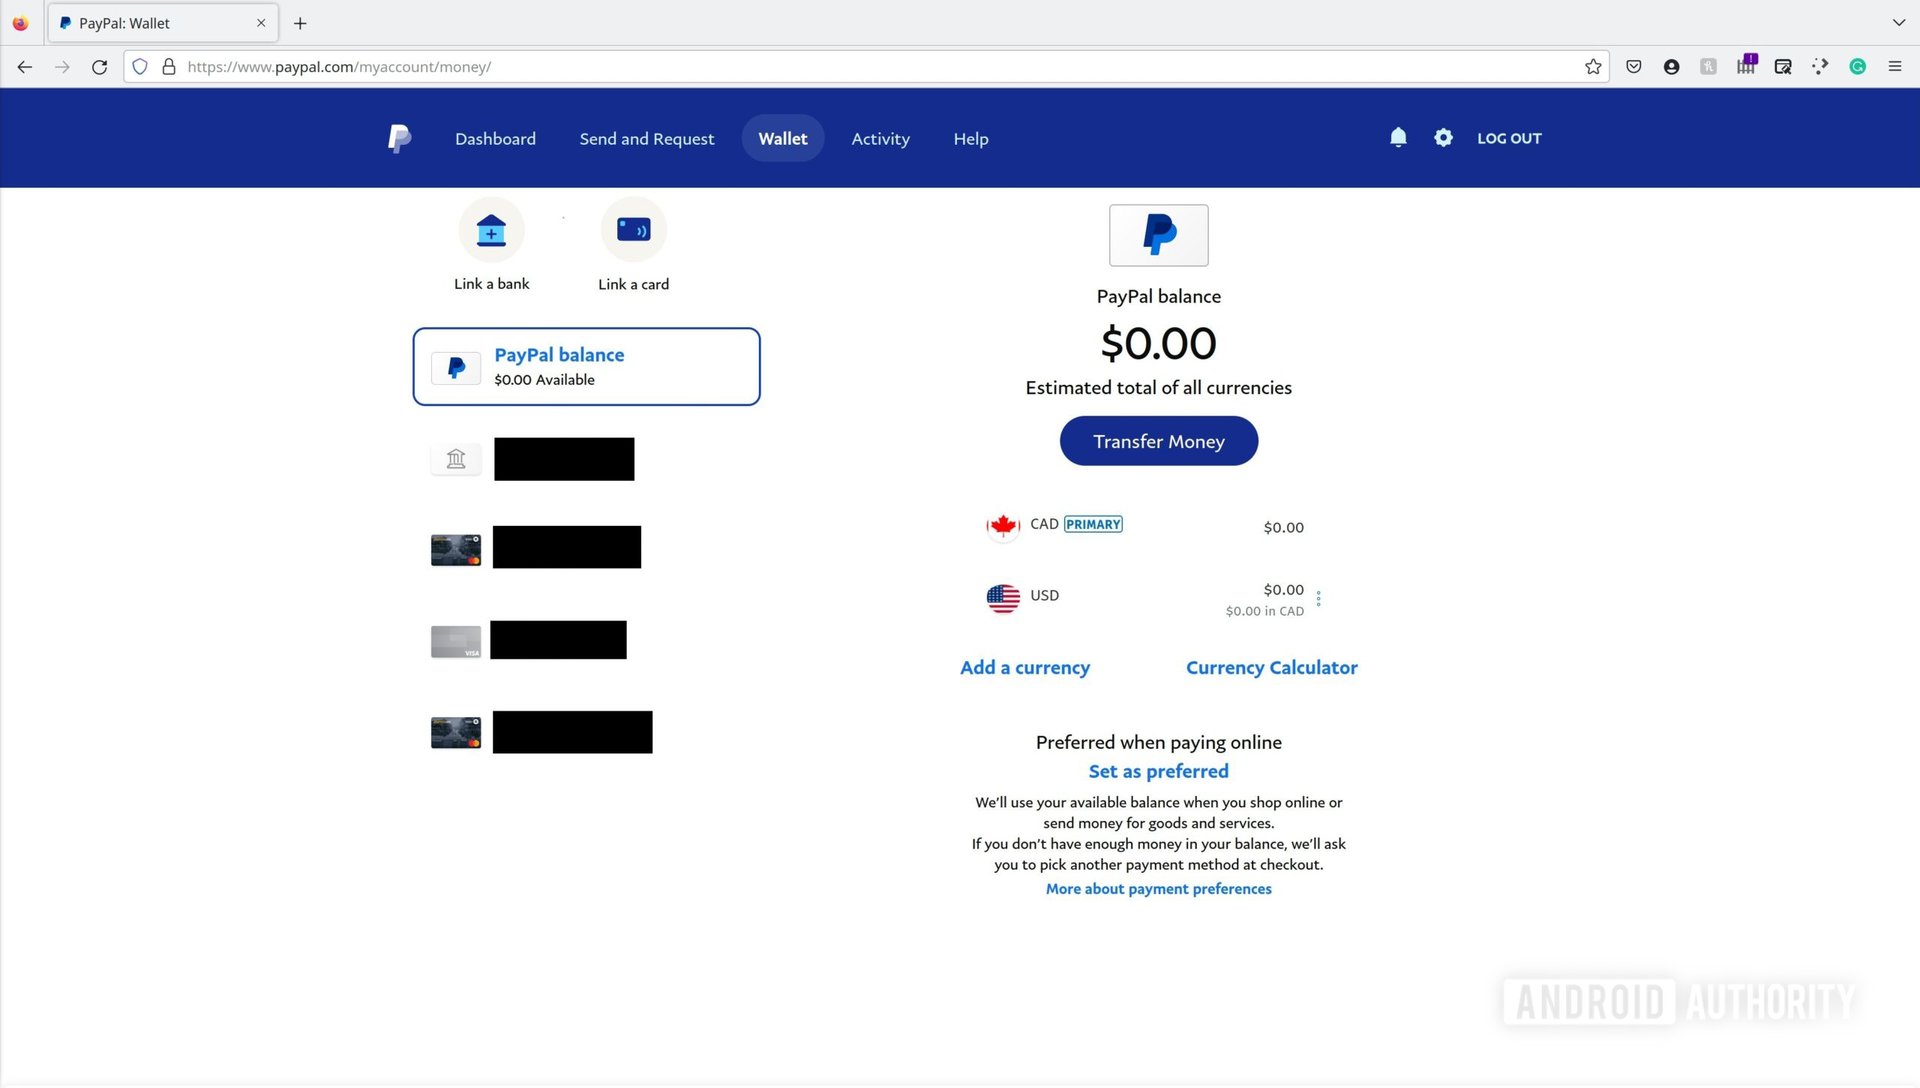 A screenshot of the PayPal wallet page.